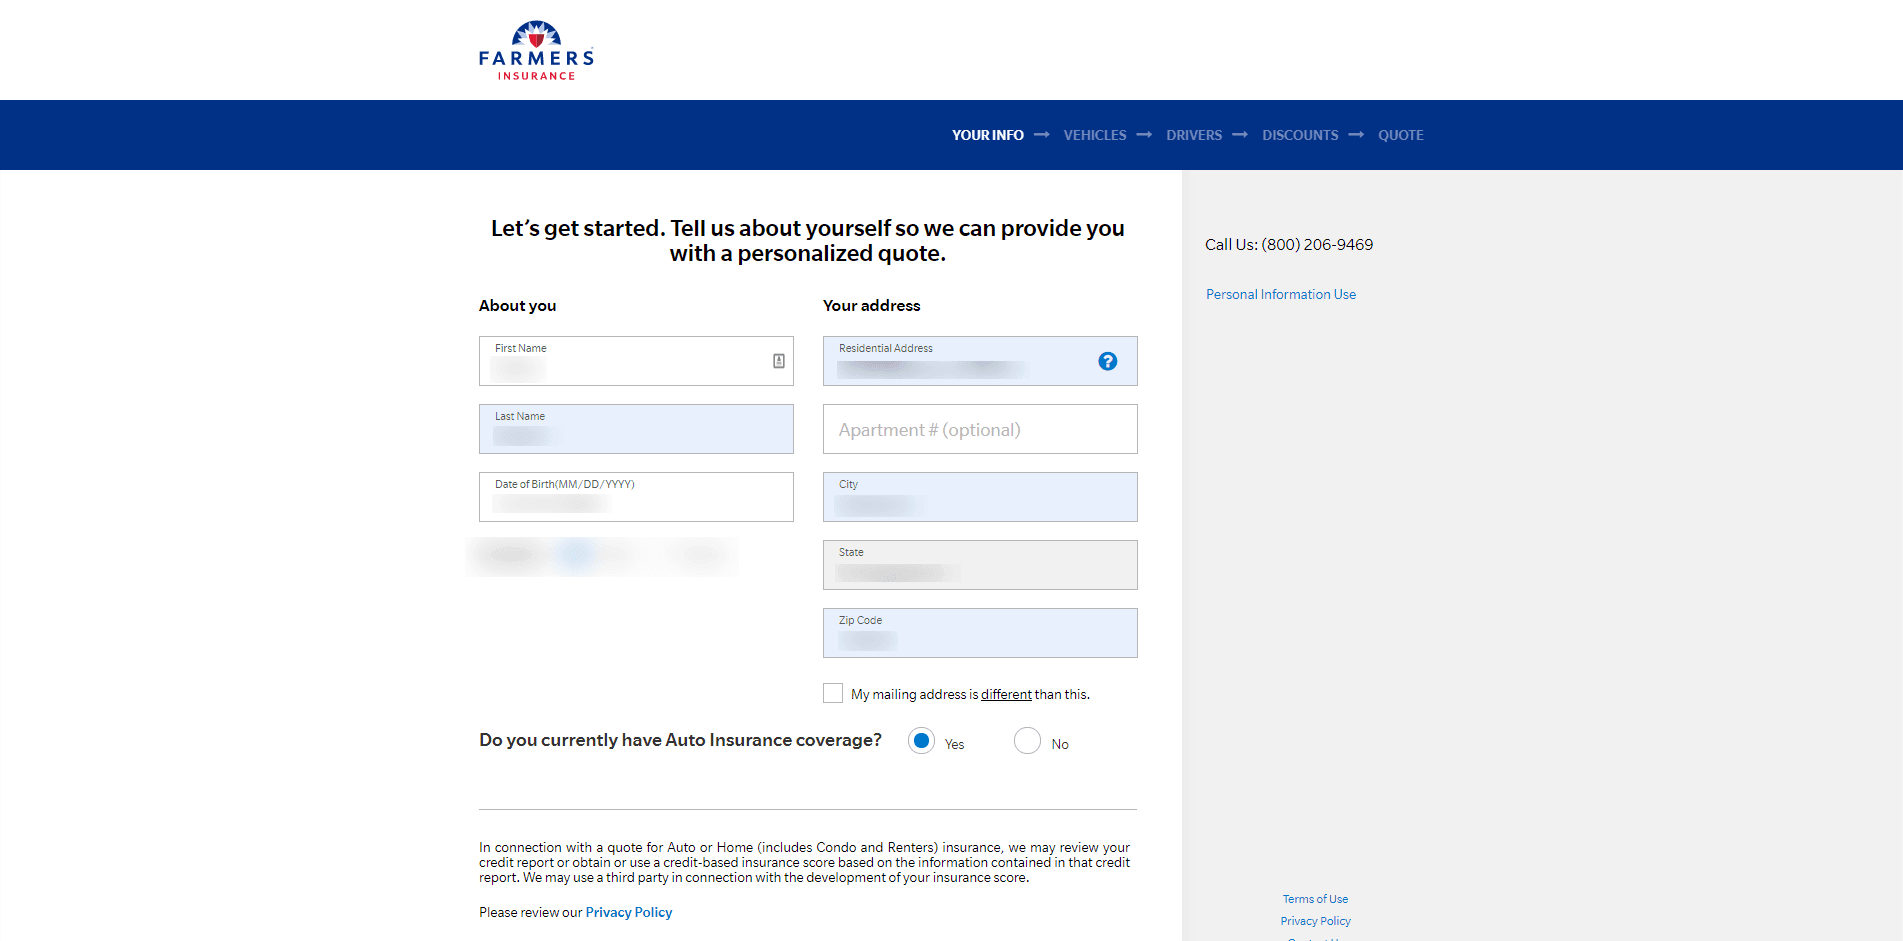 Farmers Insurance Review - Application step 3